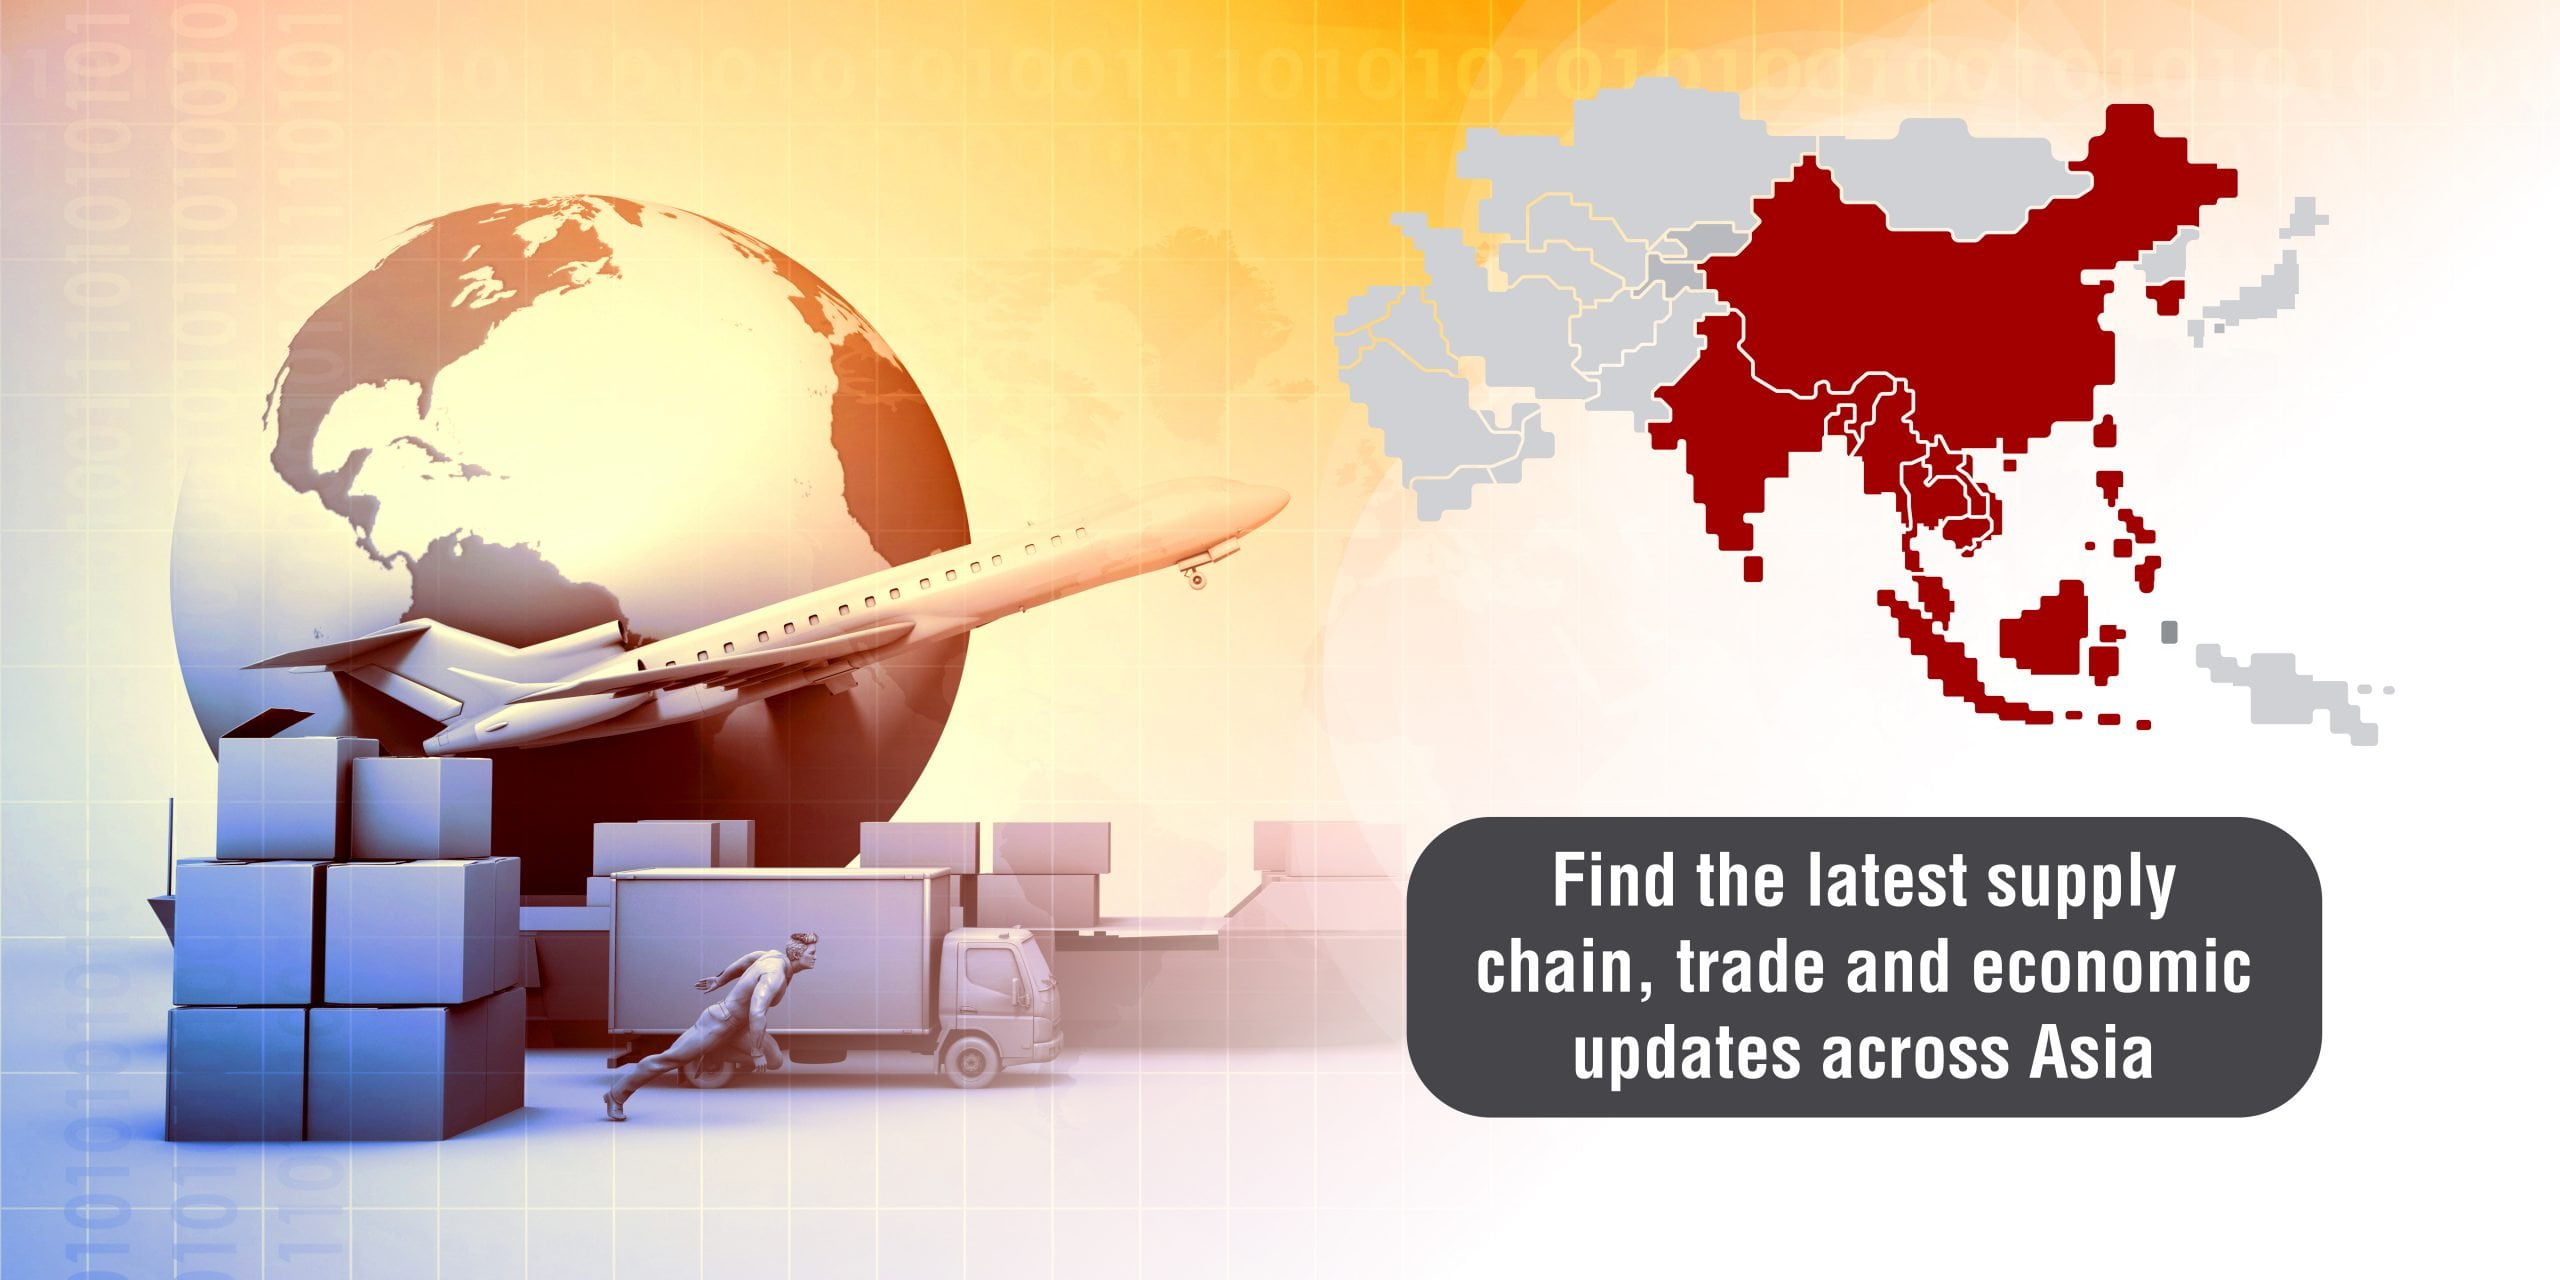 Find the latest supply chain trade and economic updates across Asia